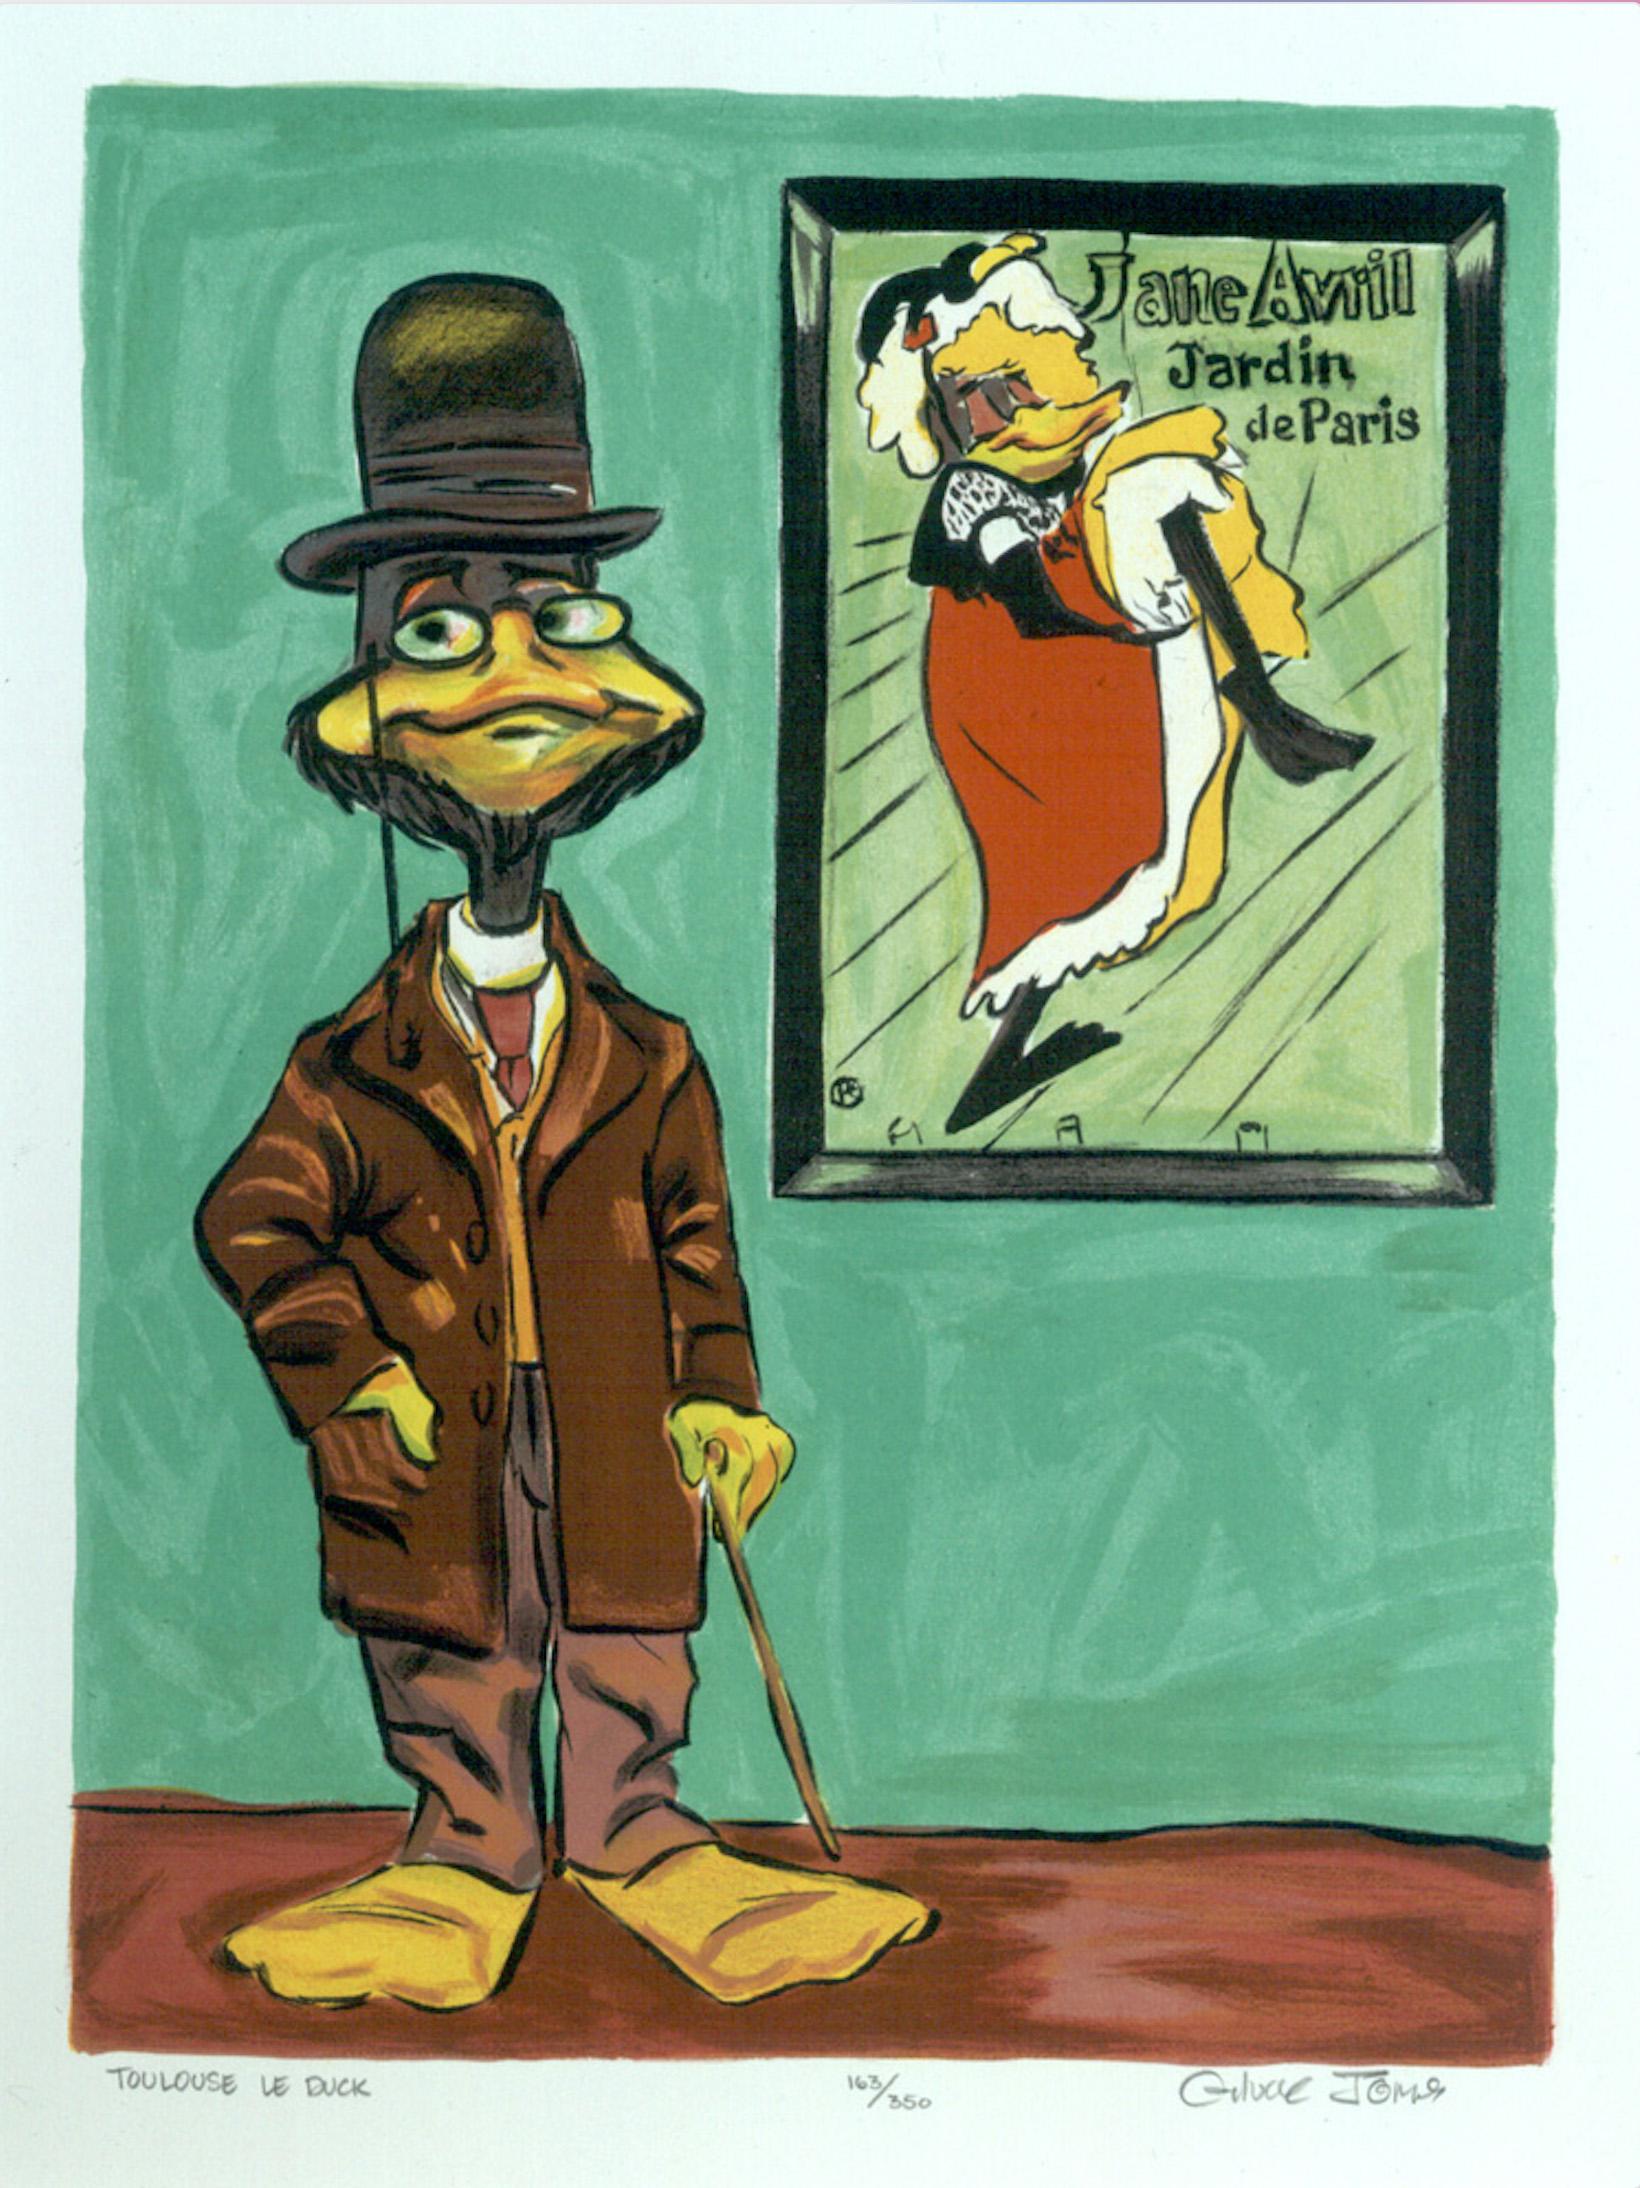 TOULOUSE LE DUCK

MEDIUM: Lithograph 
SIZE: 16" x 12"
EDITION SIZE: 350
SKU: LITHO-103

ABOUT THE IMAGE: Toulouse le Duck starring Daffy Duck posed as the 19th-century Parisian painter and man-about-town, Henri Toulouse-Lautrec (in a self-portrait)